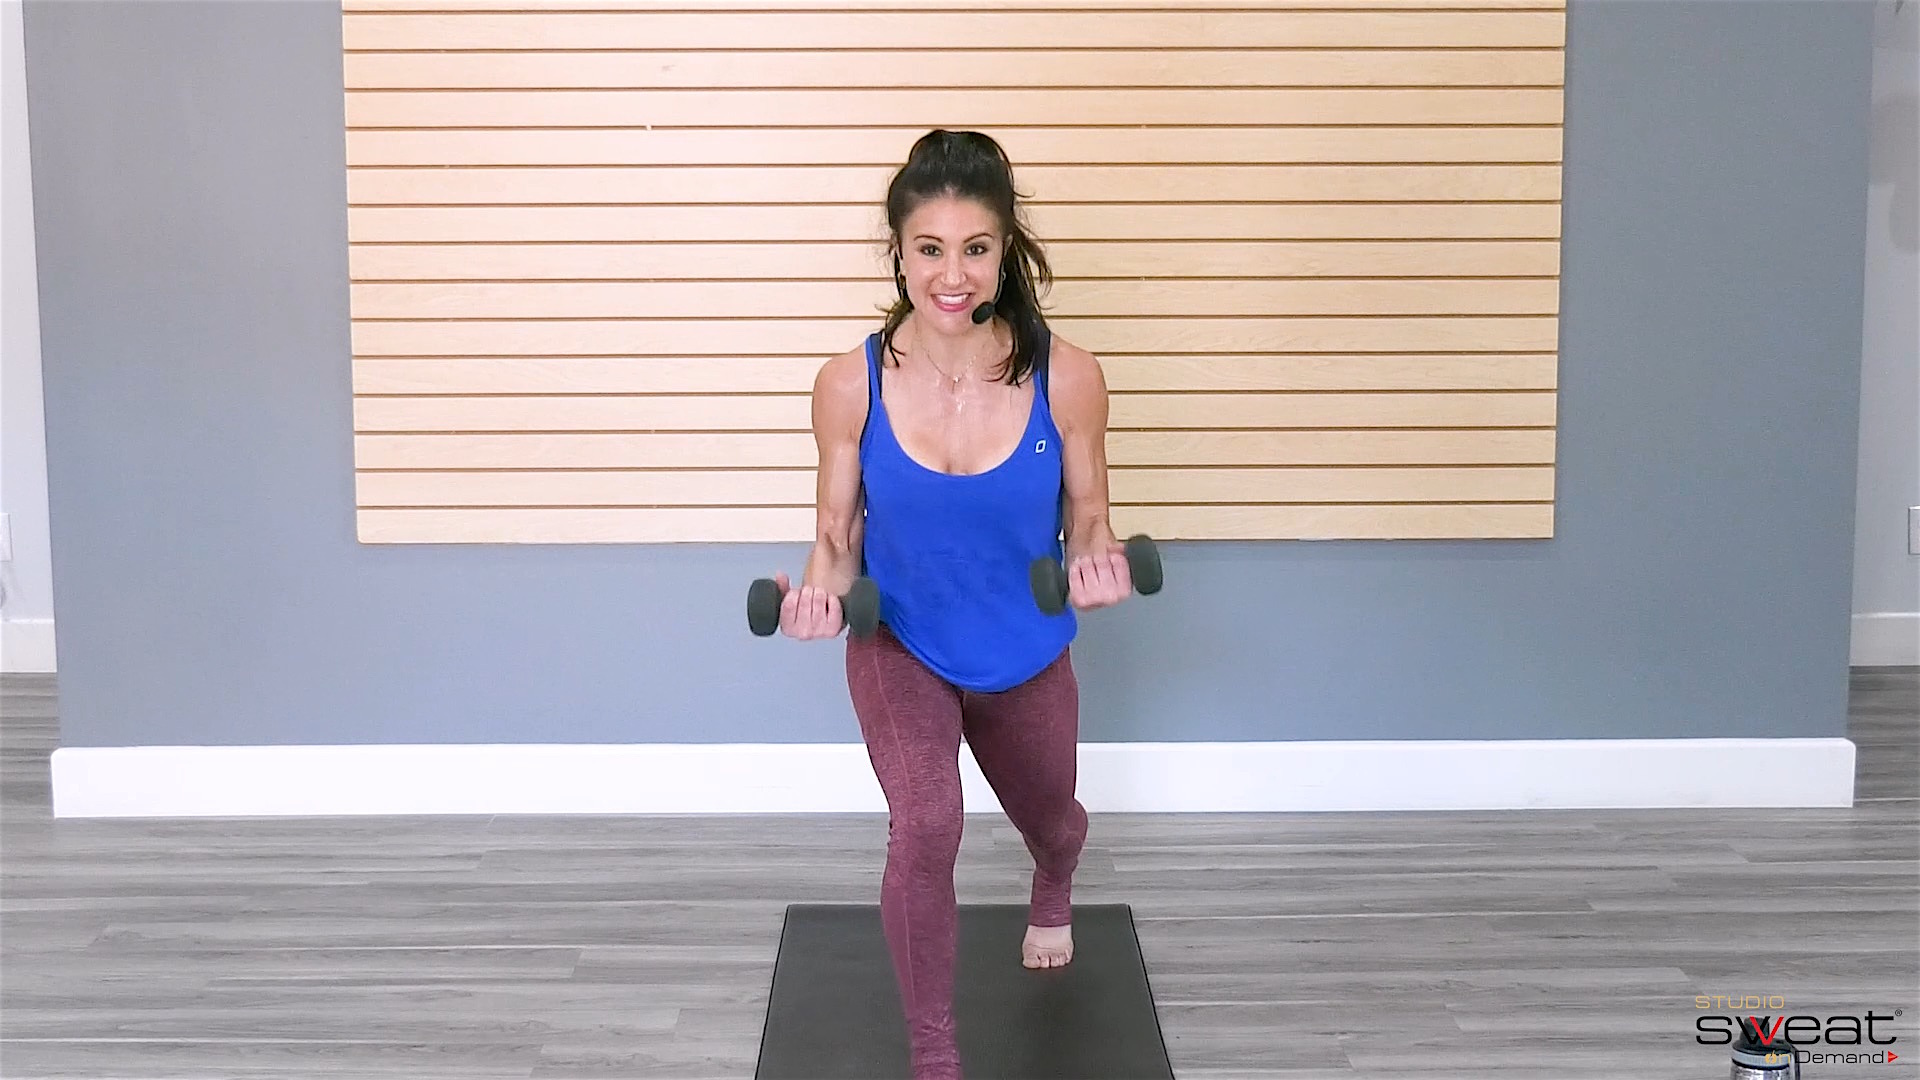 Energize your Pilates practice with Michael and Ton's playful Mat